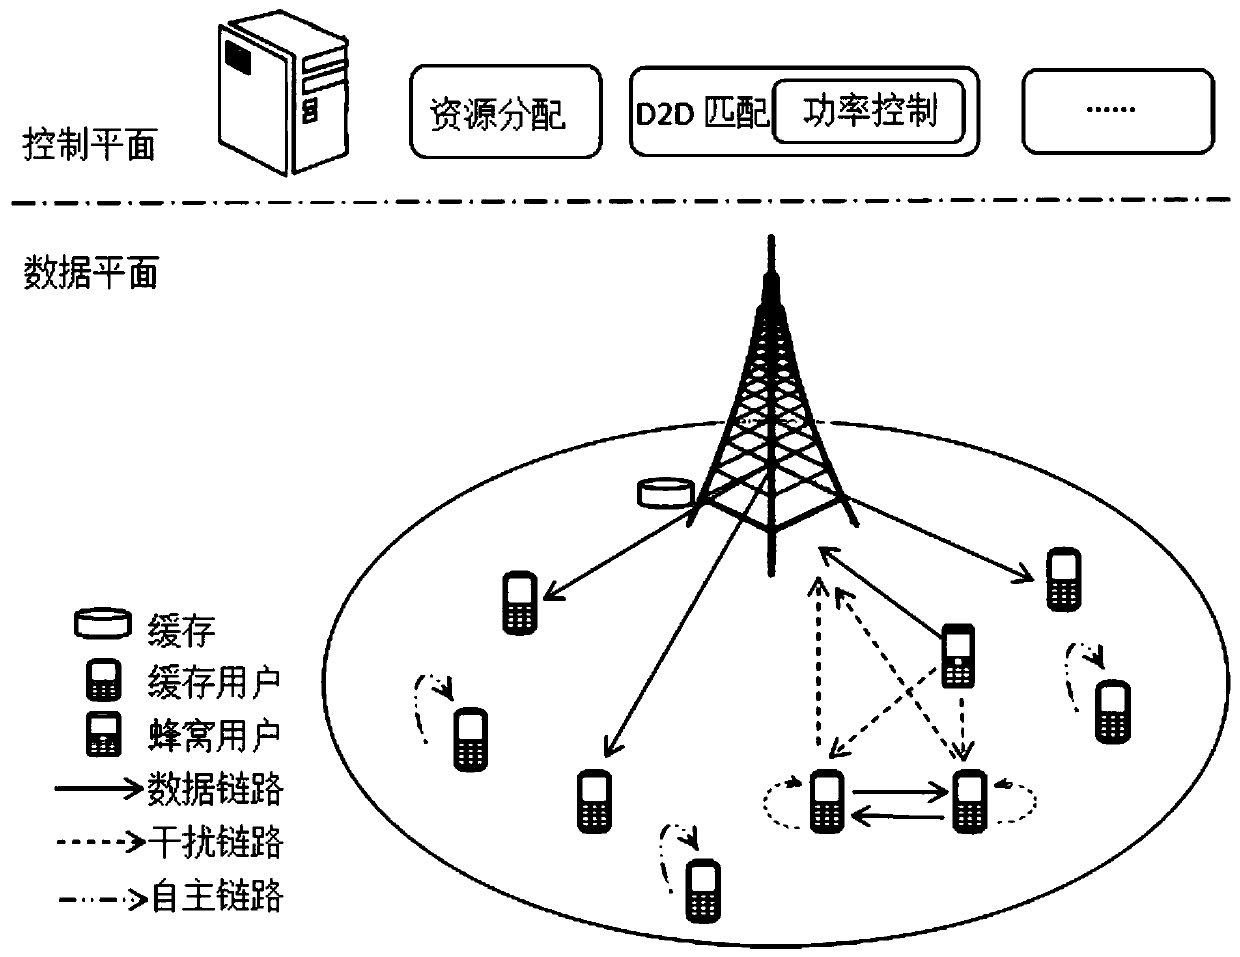 A three-dimensional D2D matching algorithm based on a software defined wireless network